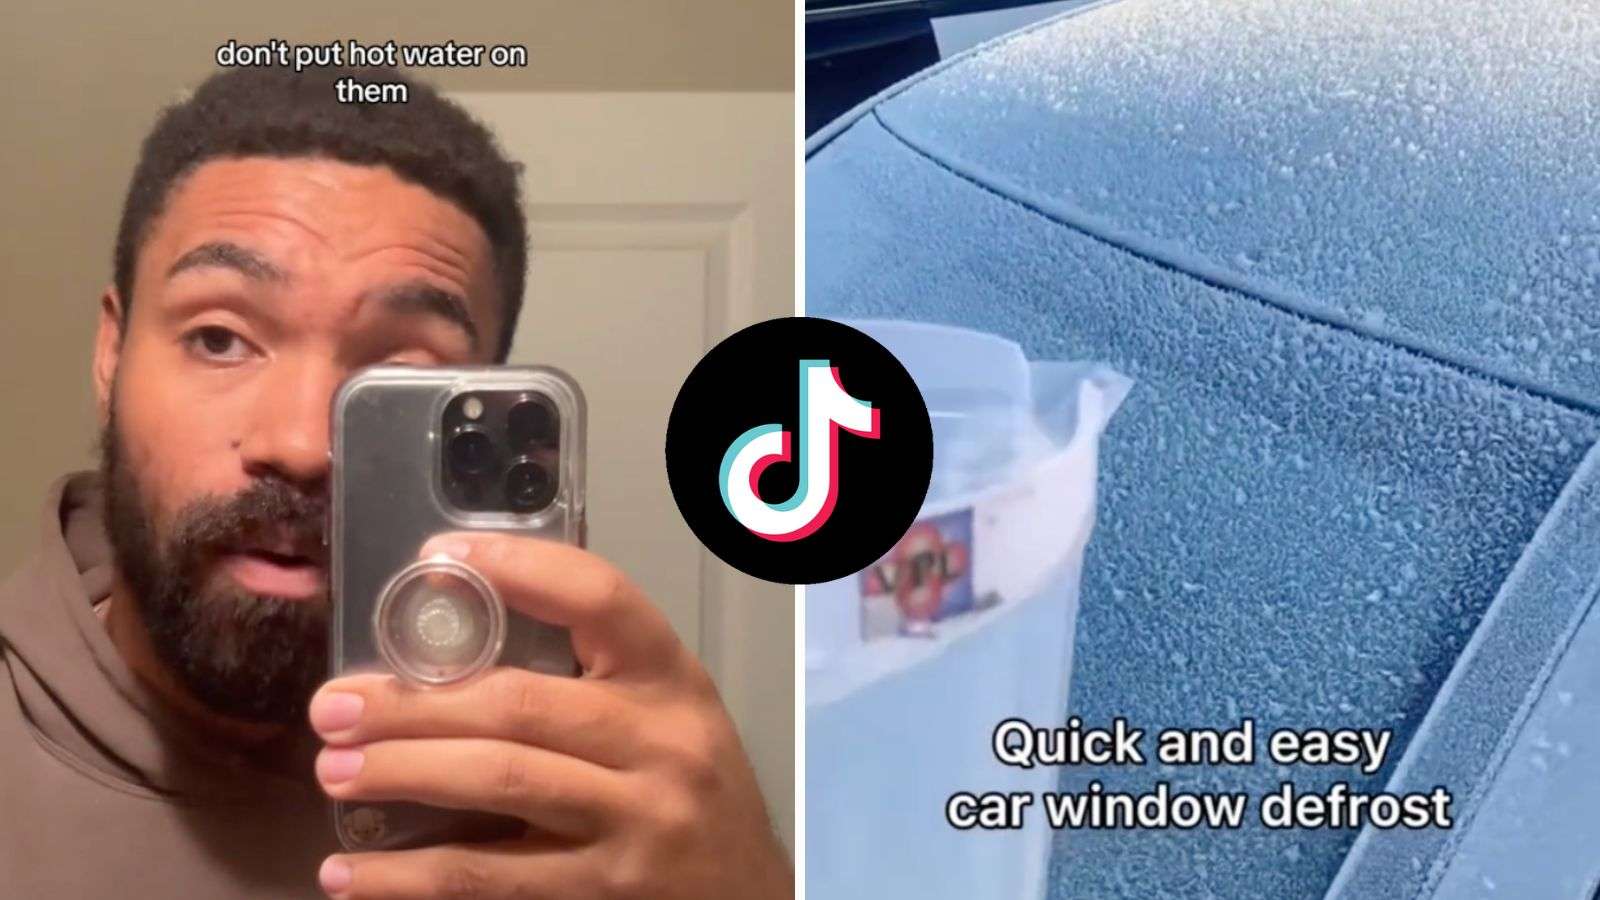 TikToker goes viral for sharing the right way to defrost car windshields